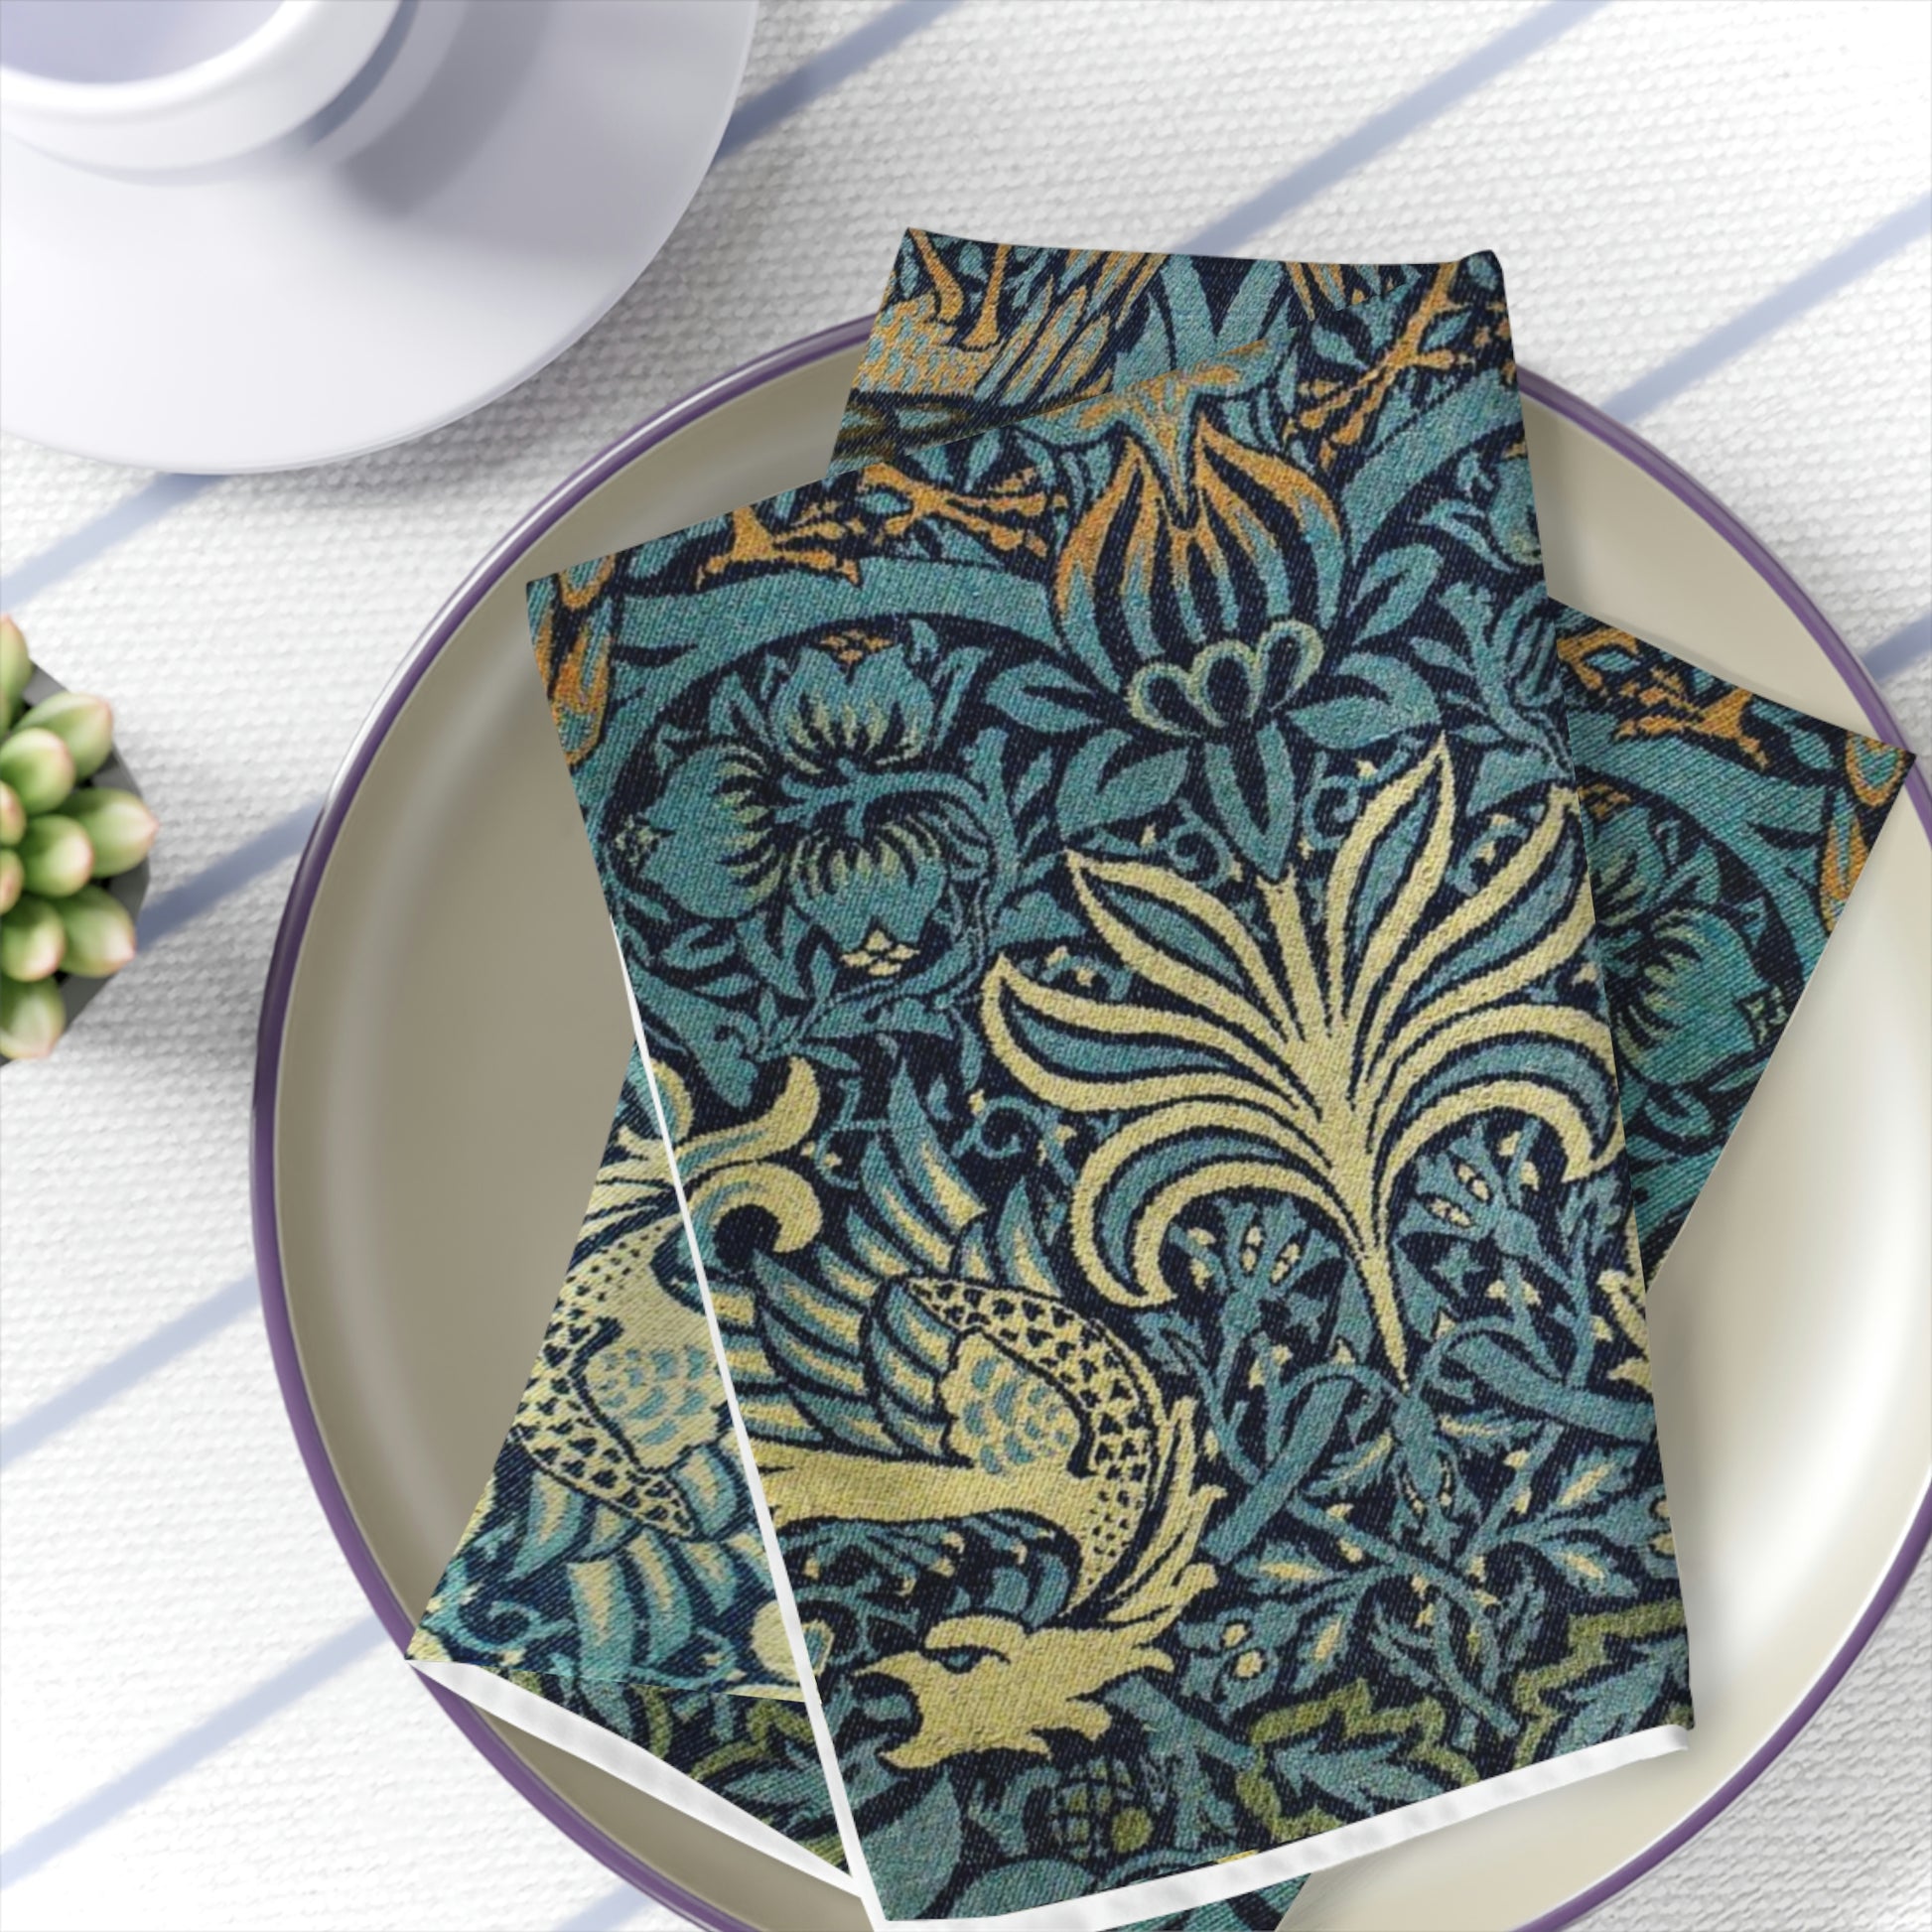 William Morris Collection – Tabbisocks